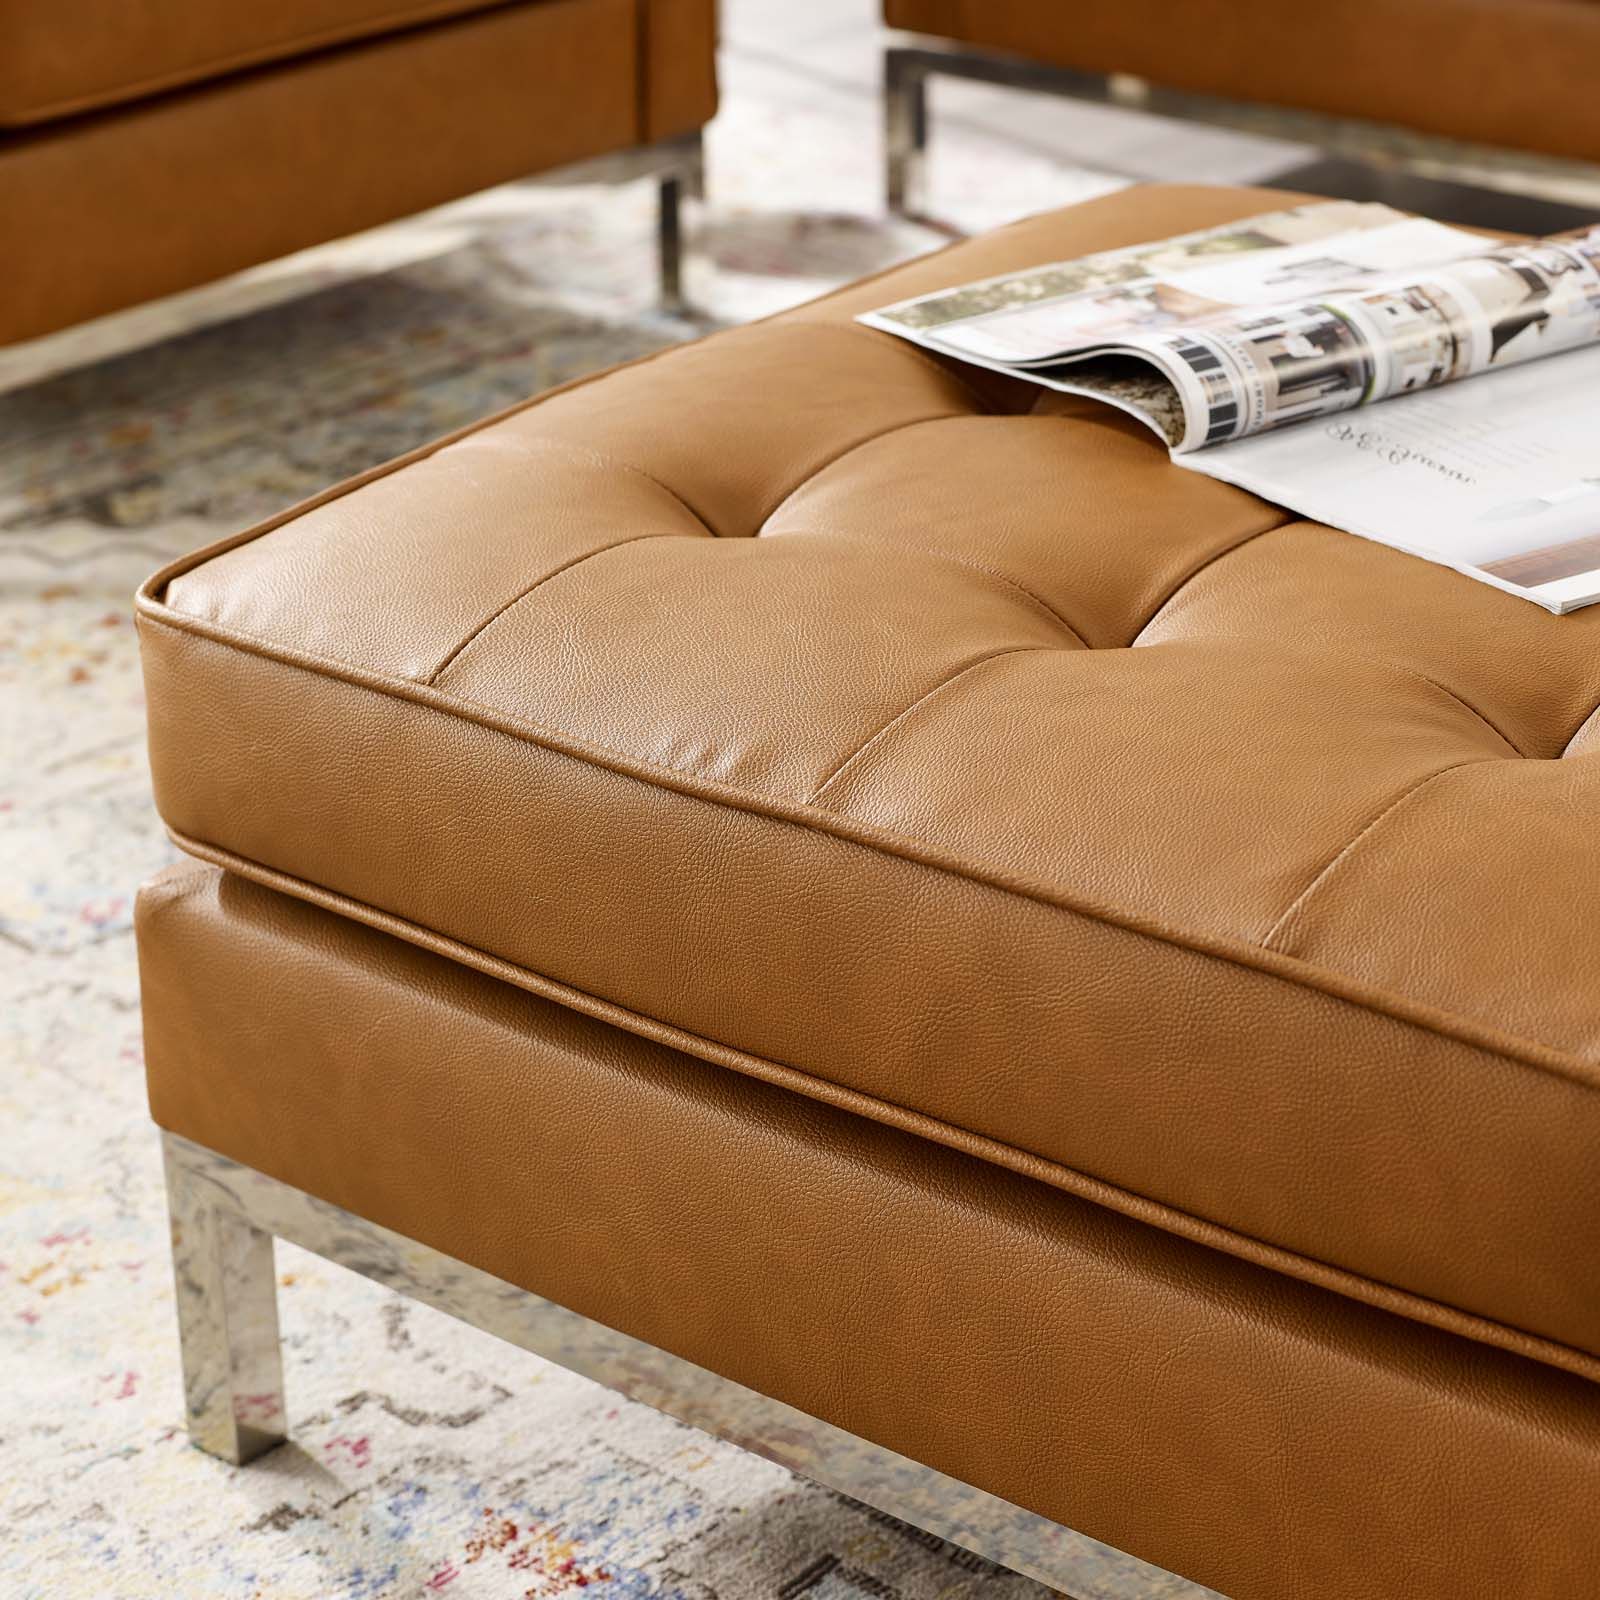 Loft Tufted Upholstered Faux Leather Ottoman Regarding Current Leather Pouf Ottomans (View 5 of 10)